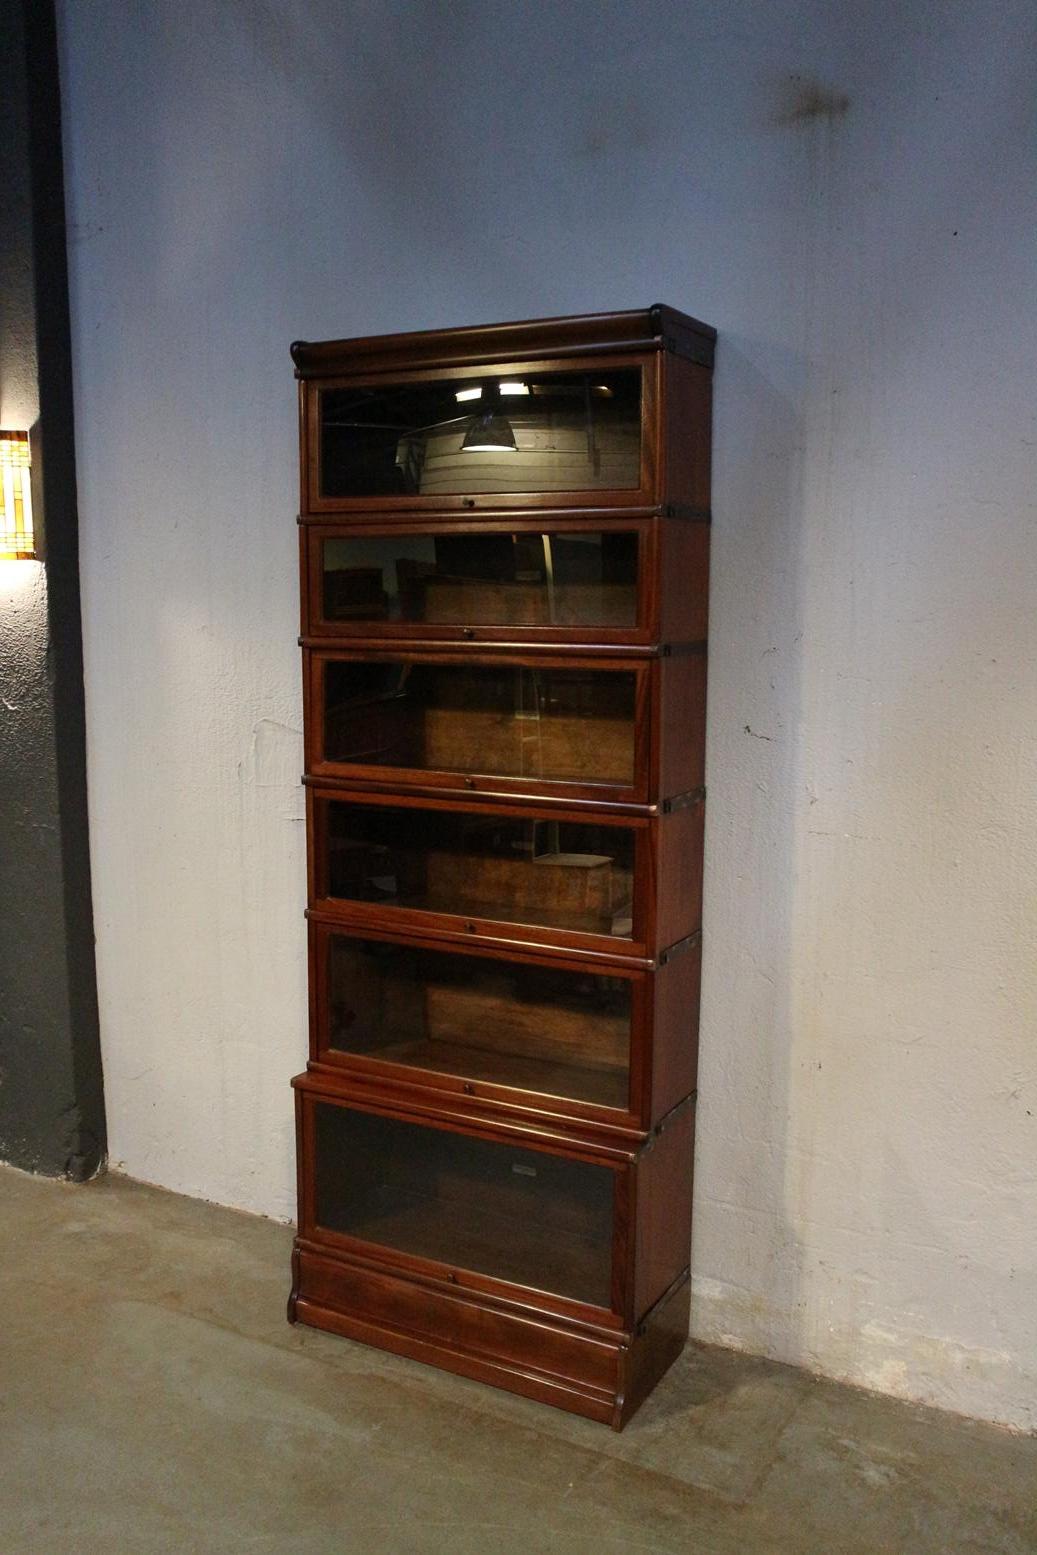 Beautiful antique mahogany Globe Wernicke bookcase in perfect condition. The cabinet consists of 6 stackable parts.
Origin: England
Period: Approx. 1900
Size 86.5cm x 29/35cm x h.224cm